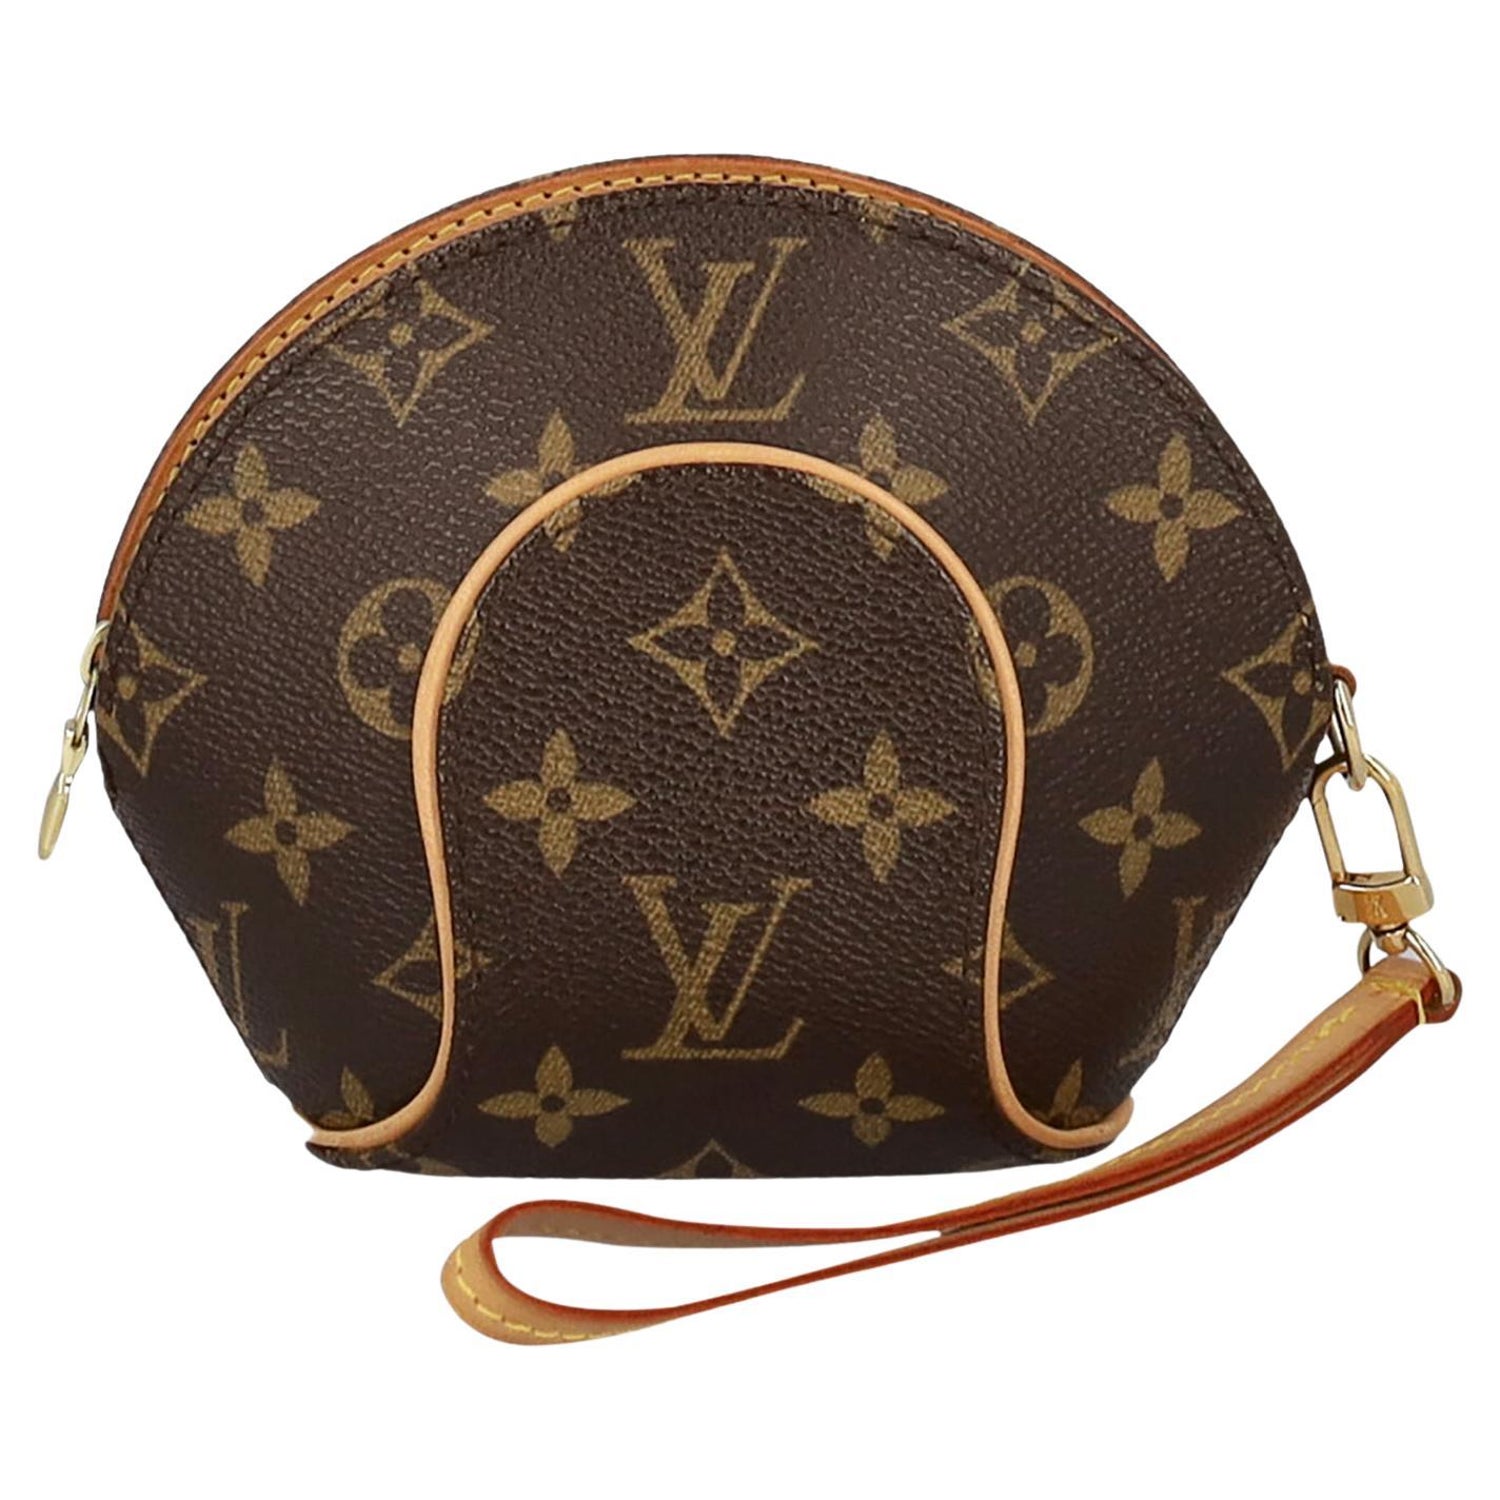 Bella Hadid's Louis Vuitton Graffiti Bag Is Straight Out Of 2001